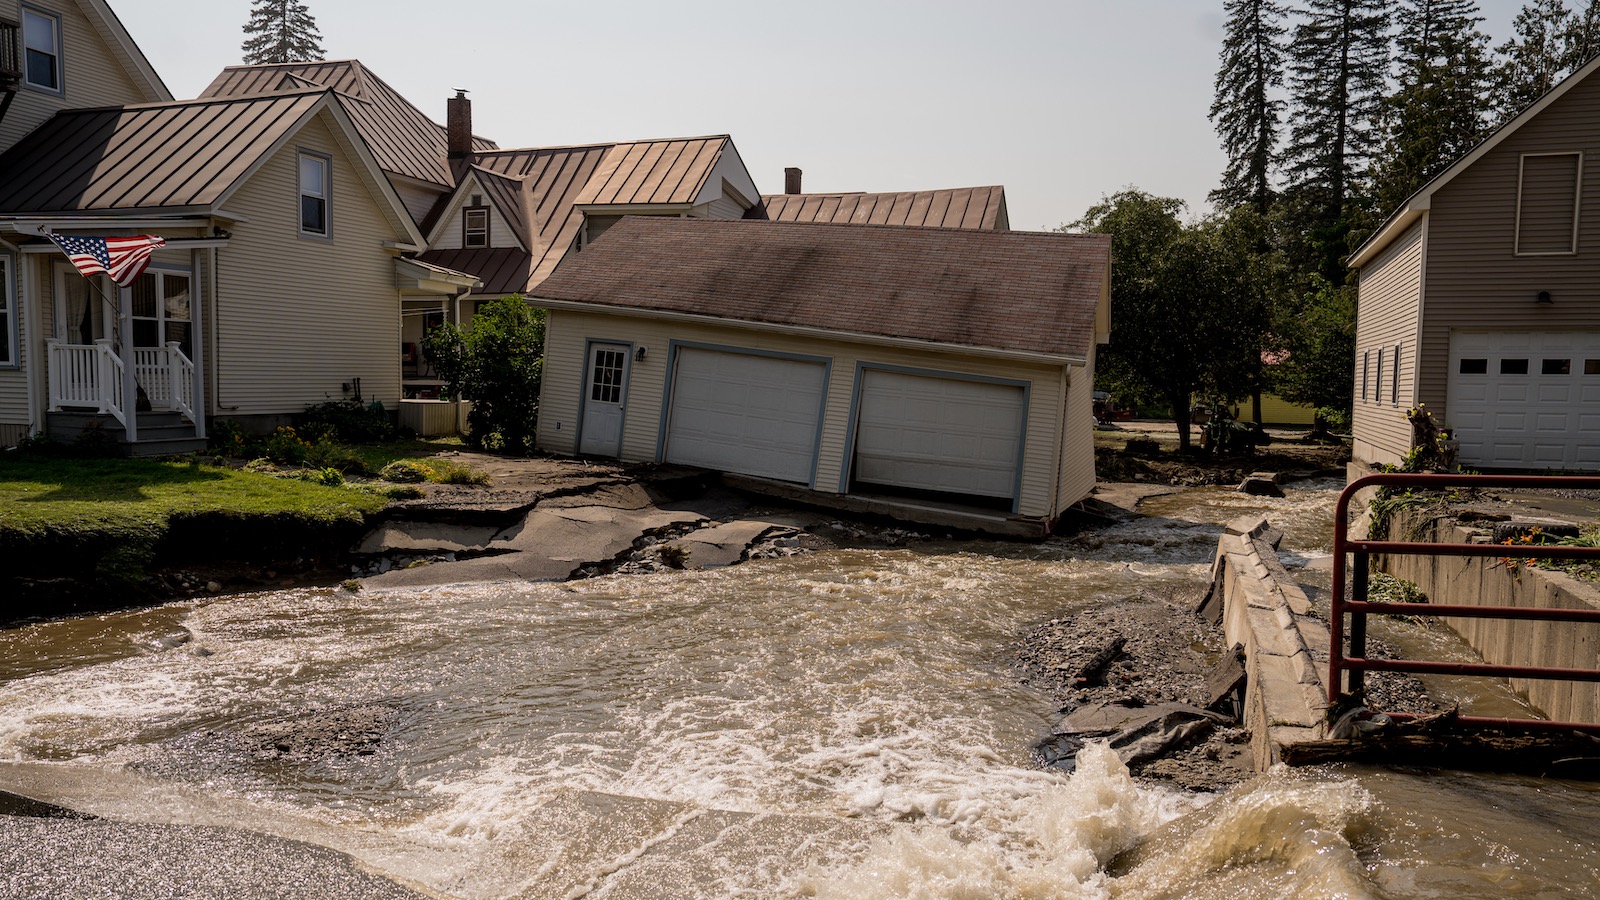 A two-car garage leans precariously on its foundation as a torrent of water flows over a crumbled and undulating driveway following a flood in Barre, Vernont.